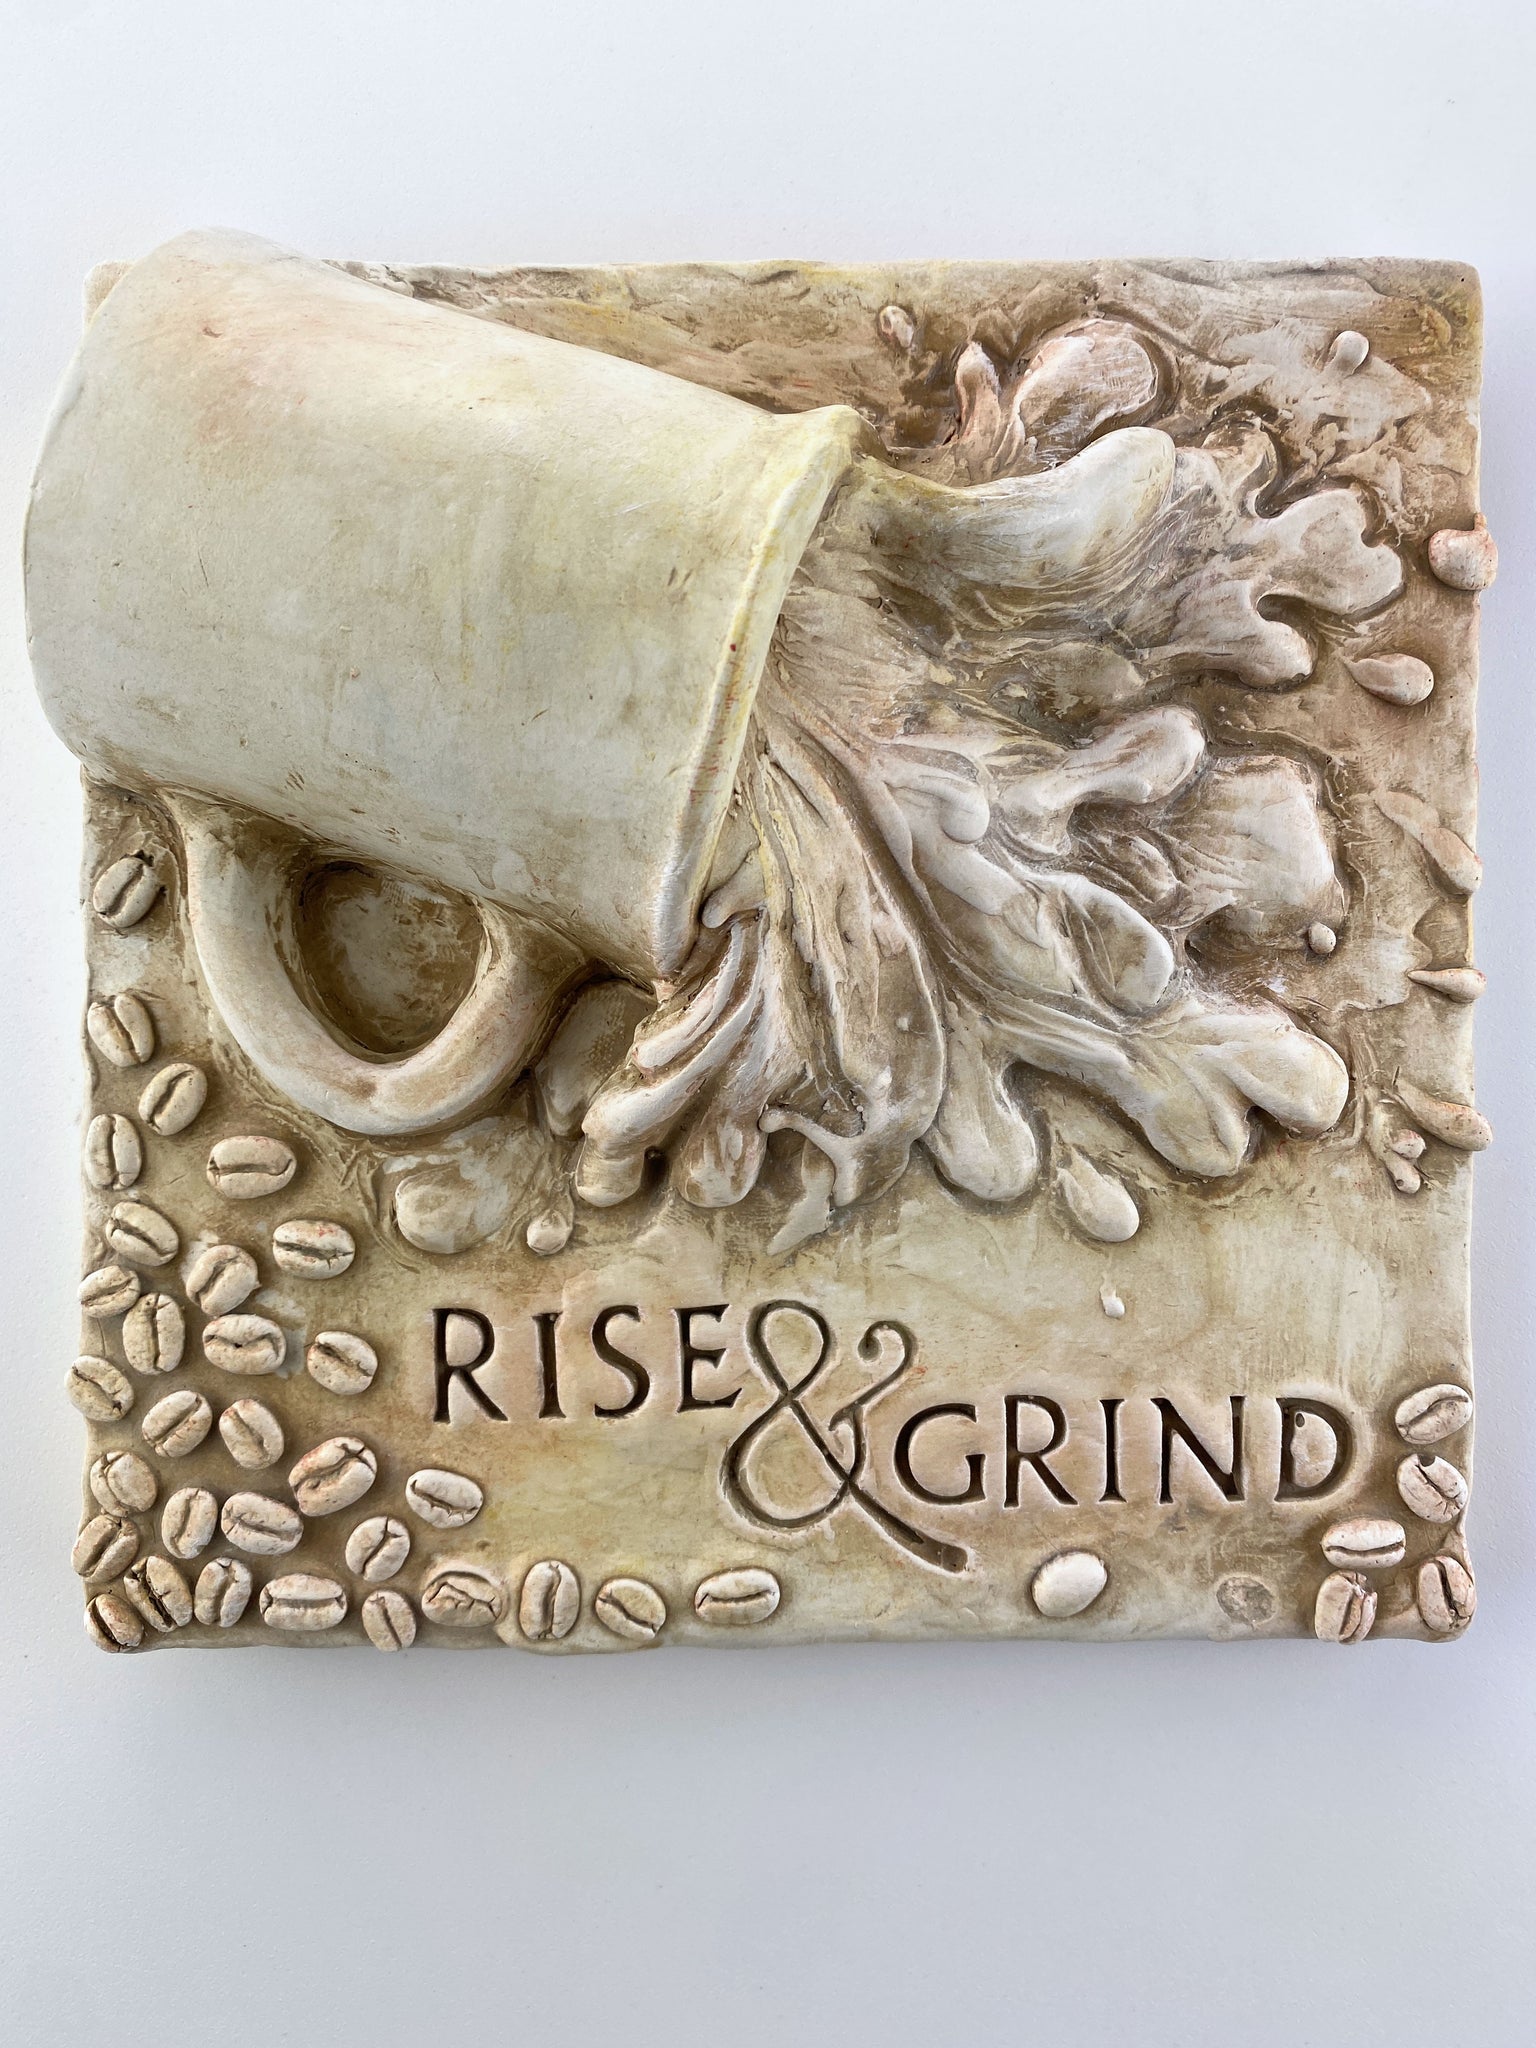 Rise & Grind Coffee Kitchen Relief Wall Sculpture - Exclusive to The Sculpture Store